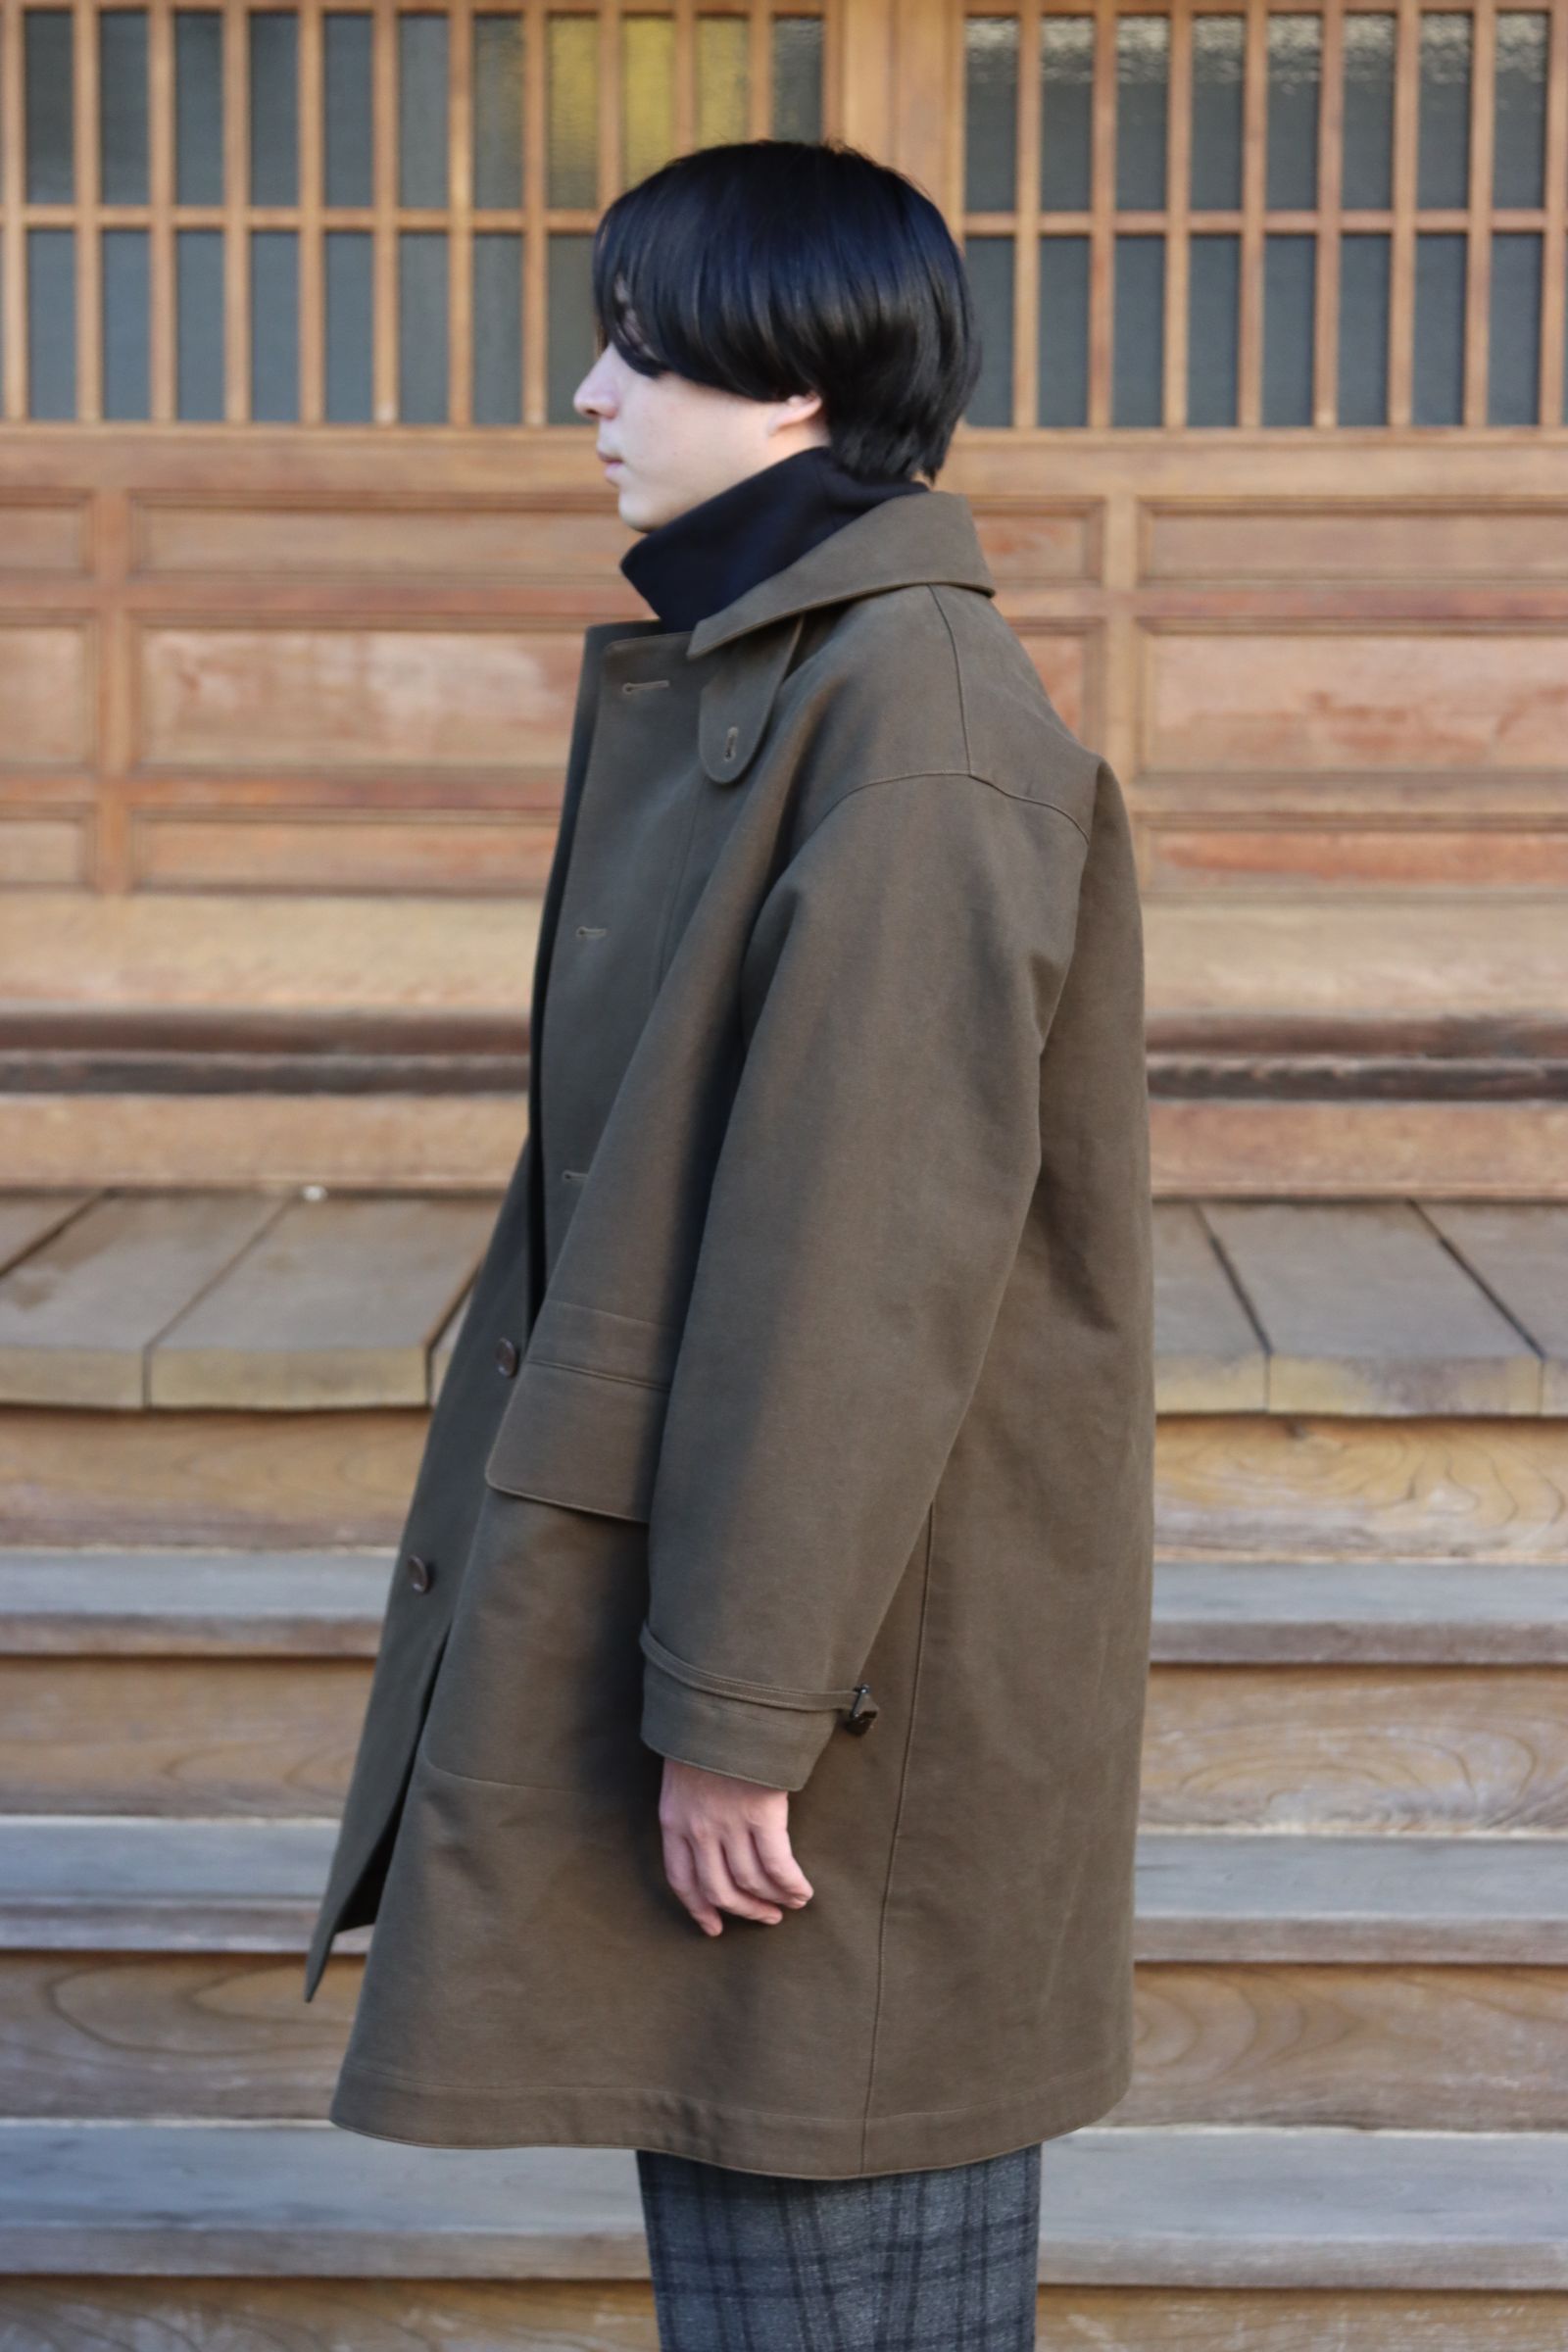 A.PRESSE Motorcycle Half Coat 22aw | www.myglobaltax.com